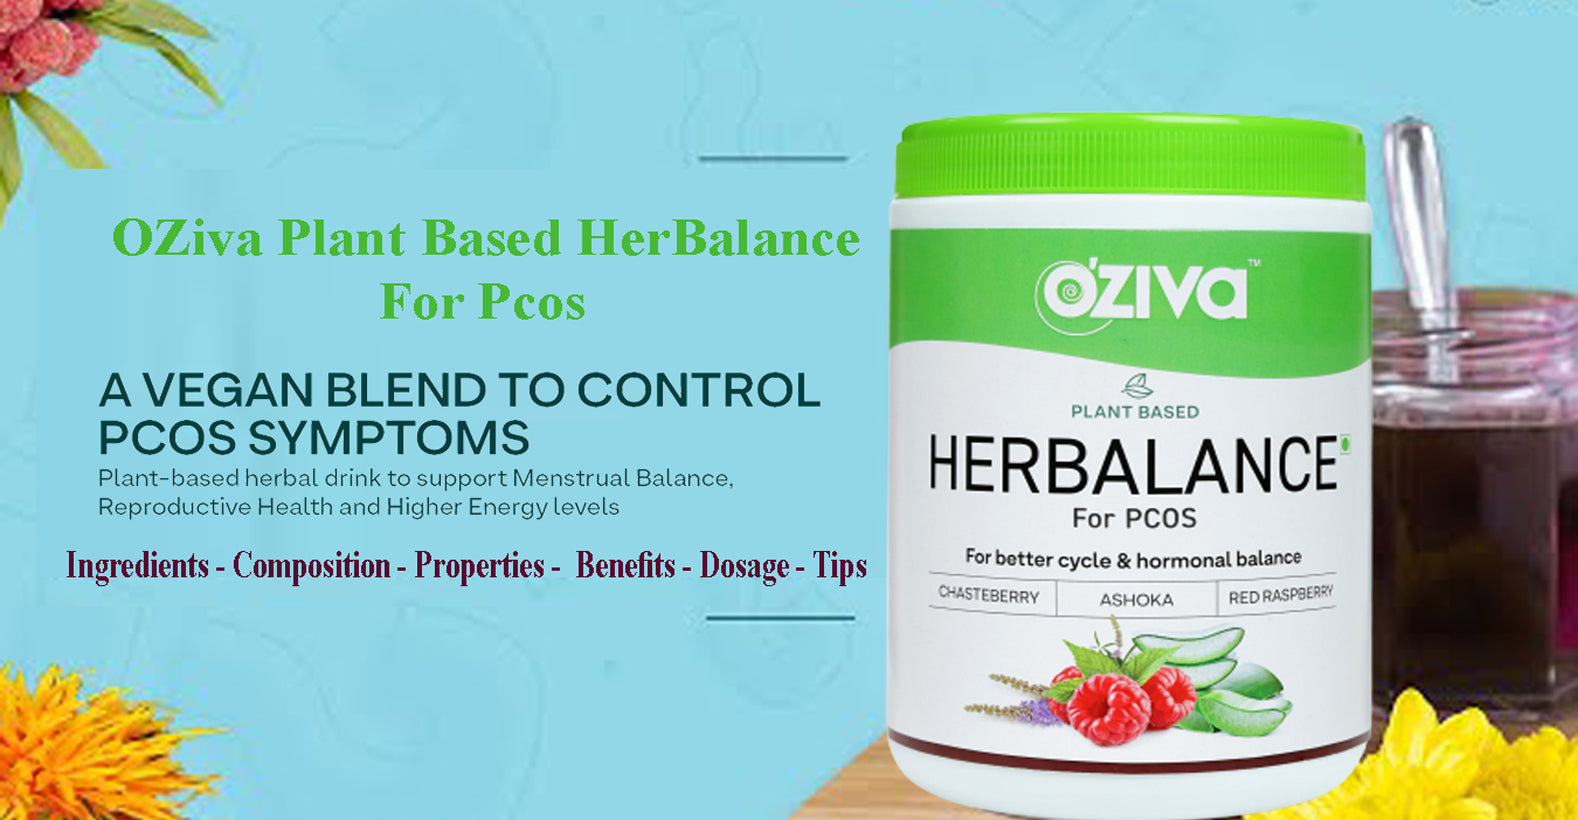 OZiva Plant Based HerBalance For Pcos - Ingredients, Composition, Properties, Health Benefits, Dosage, Tips